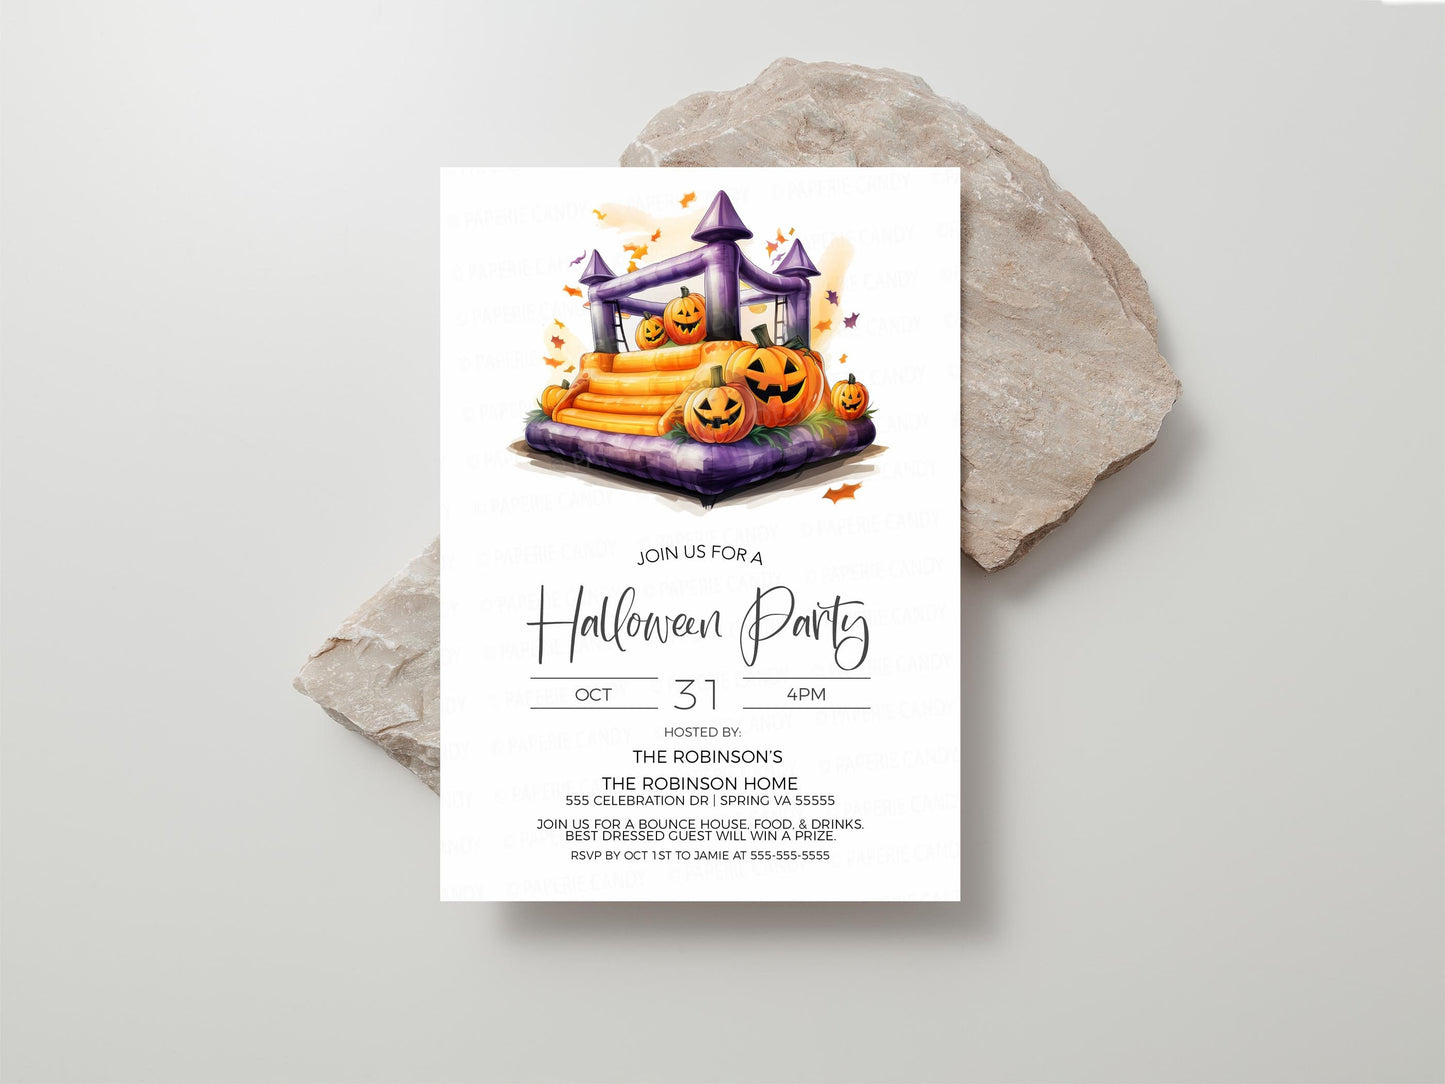 Halloween Bounce House Party Invitation, Costume Party Invite, Kids Birthday Party, Family Fun Event, Neighborhood Party, Editable Printable